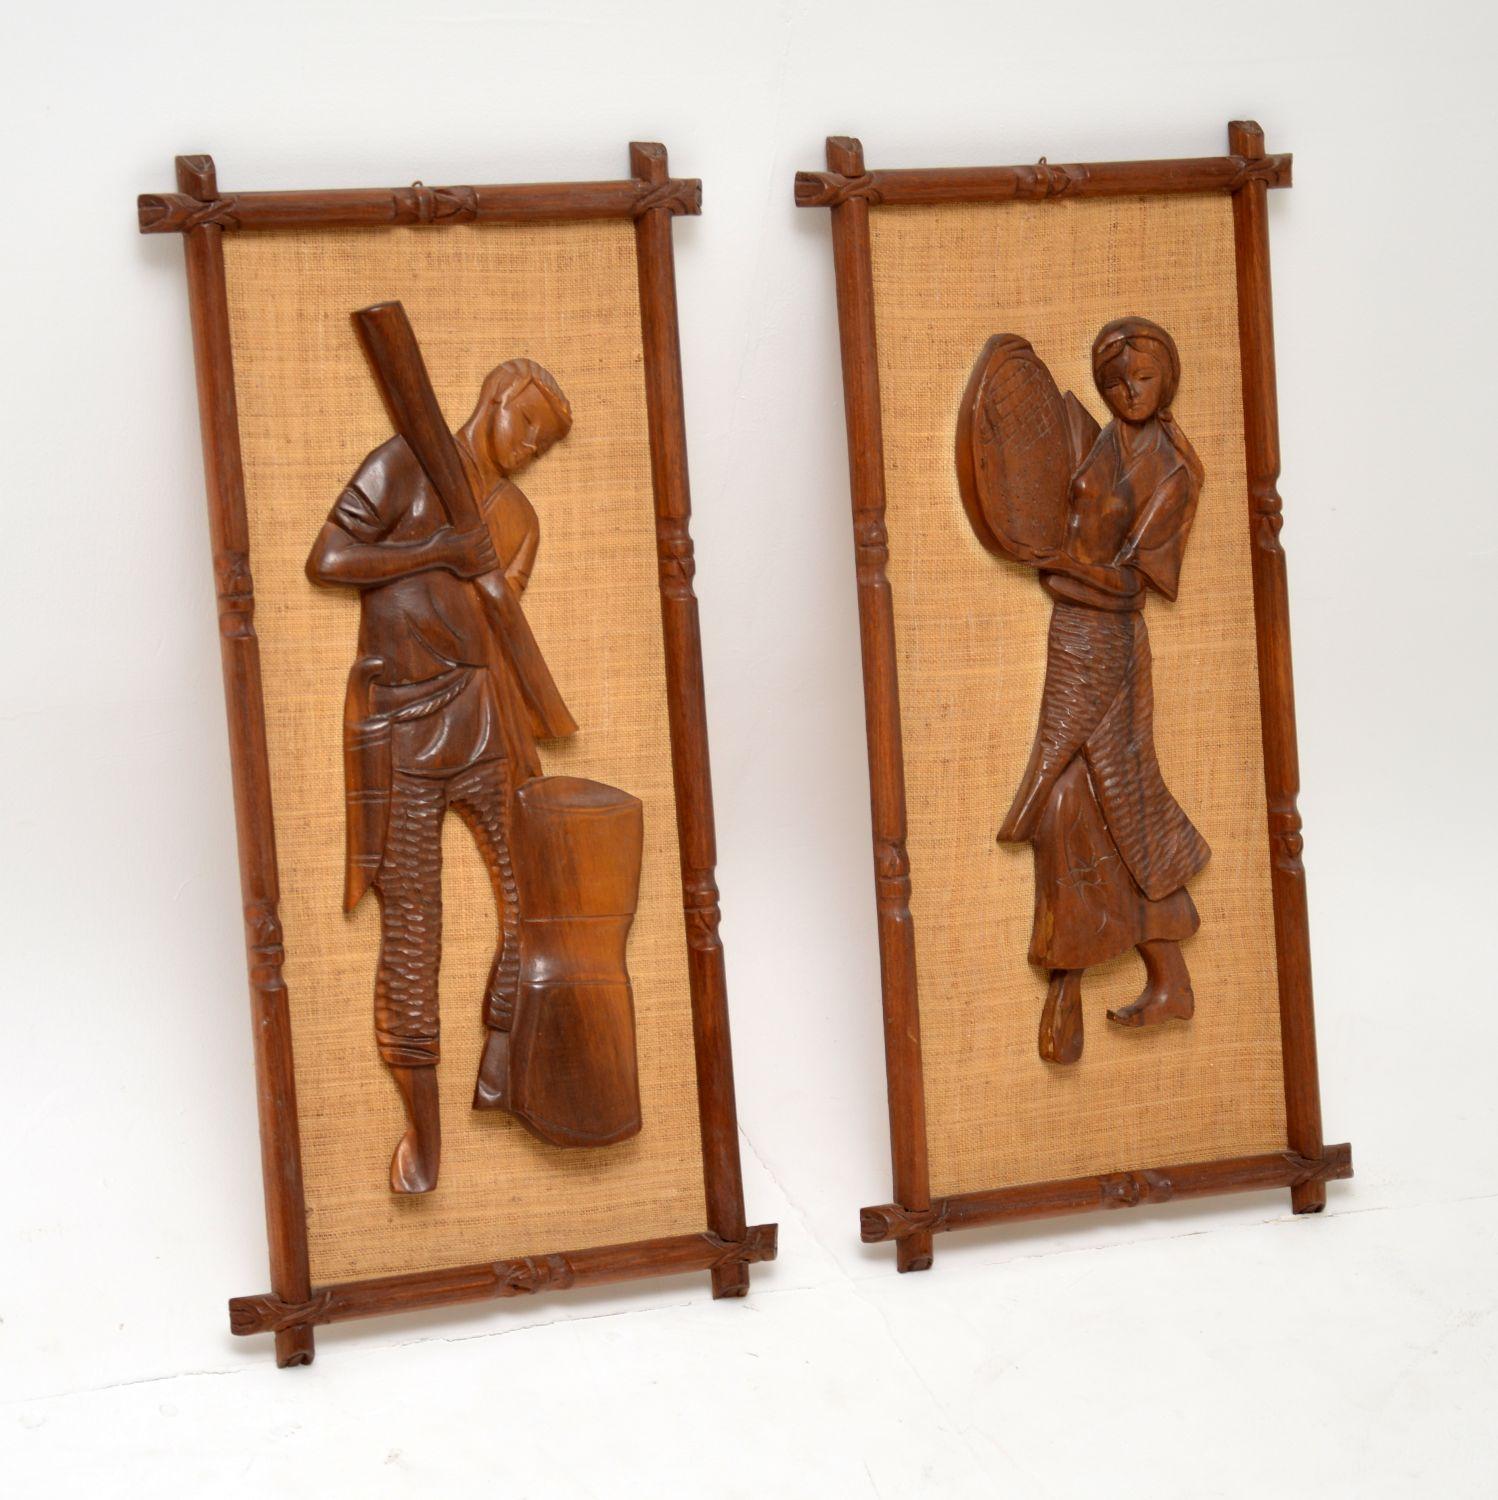 A stunning and unusual pair of vintage reliefs depicting field workers, dating from the 1960s. They are carved from what looks like solid walnut, with carved walnut frames and a rattan background. The condition is excellent for their age, with no